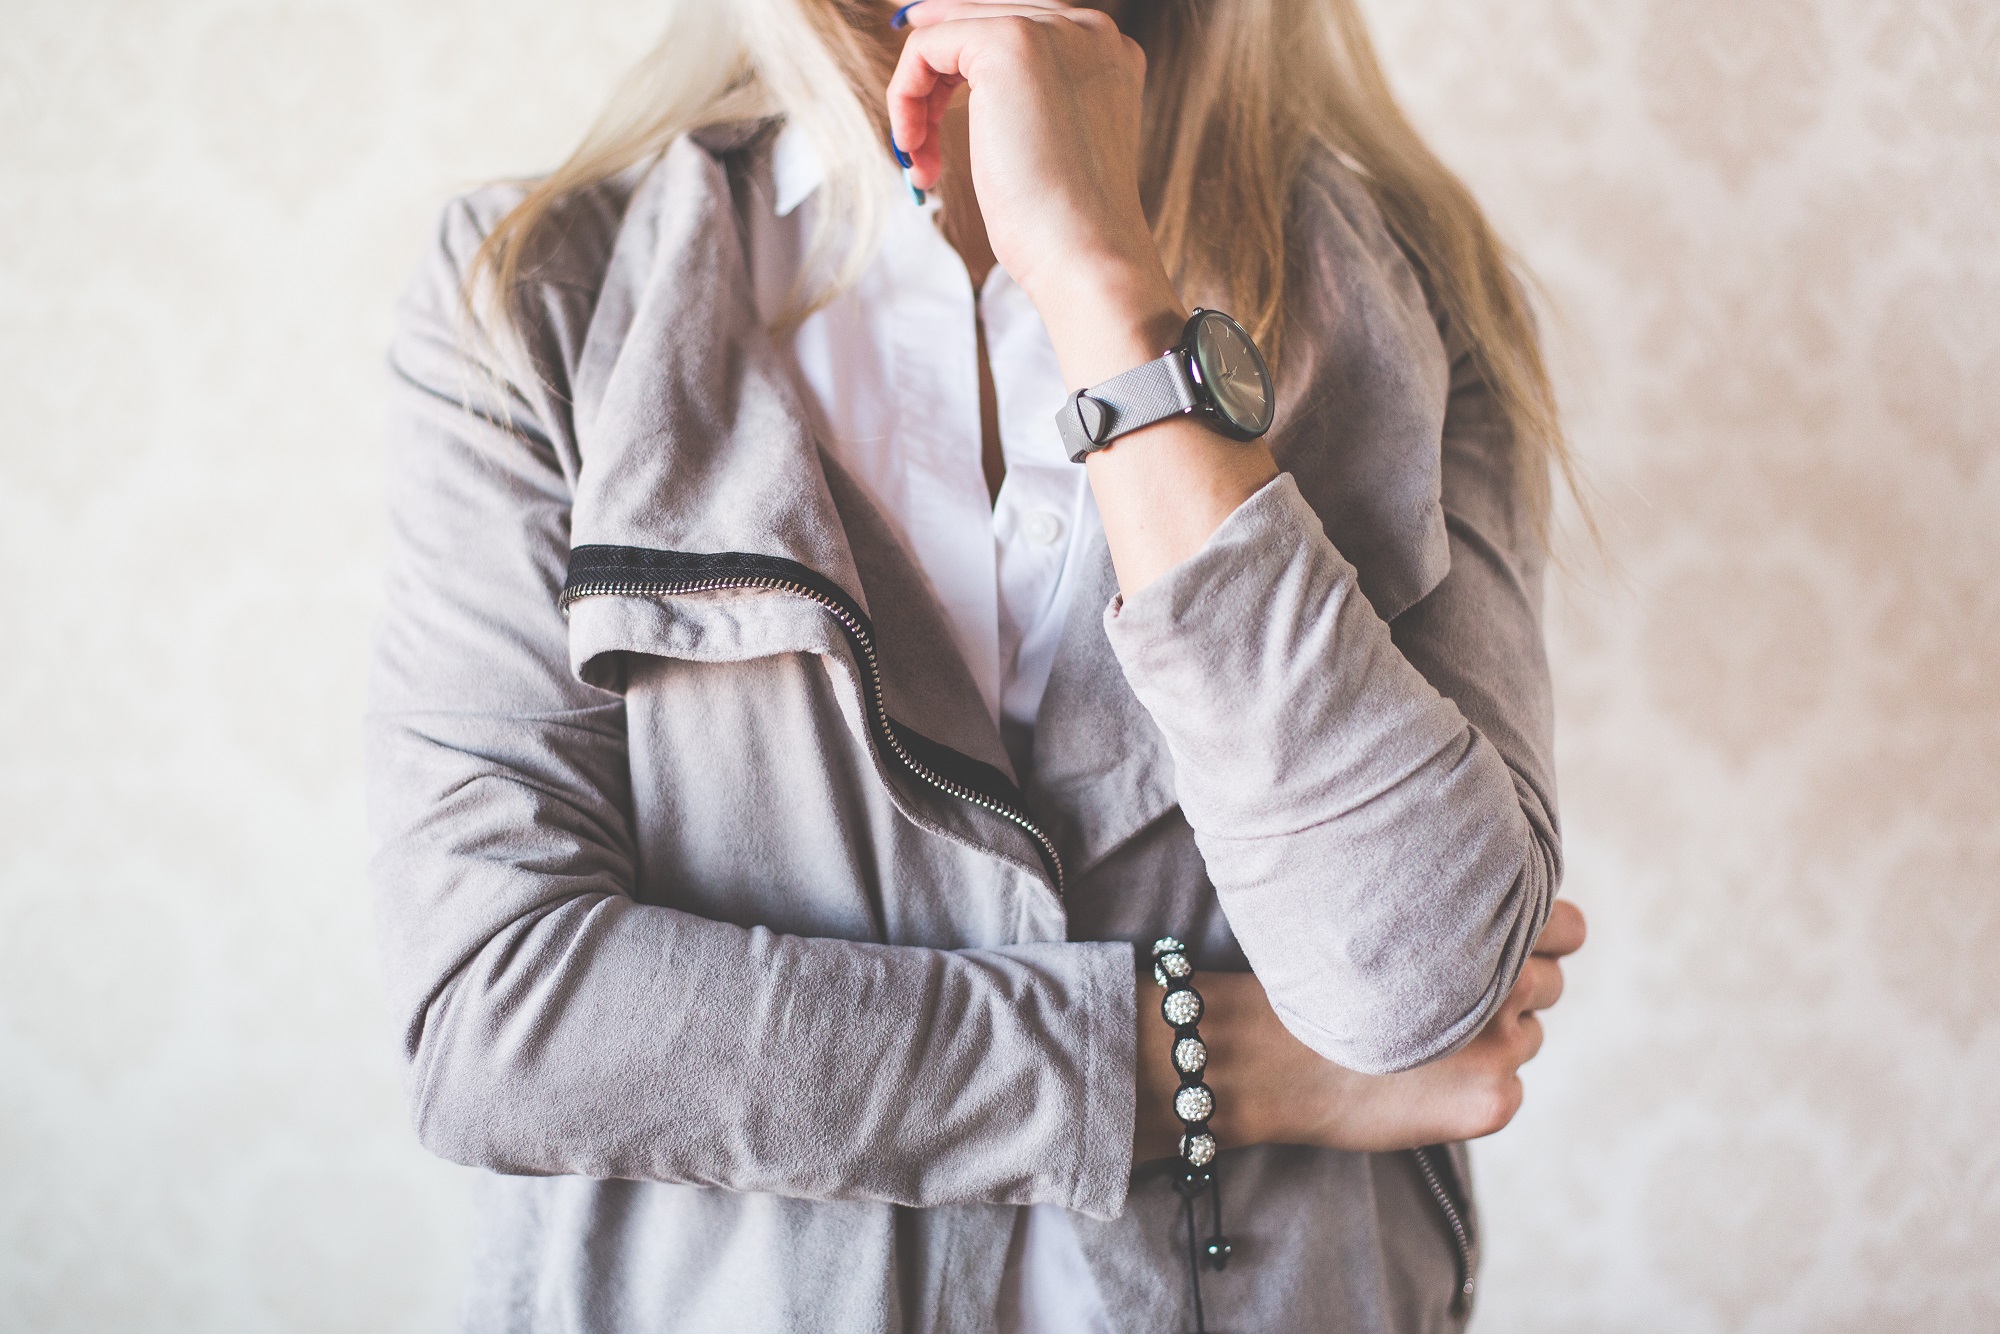 Girl Fashion Pose With Gray Watches And Suede Jacket 2 Picjumbo Com